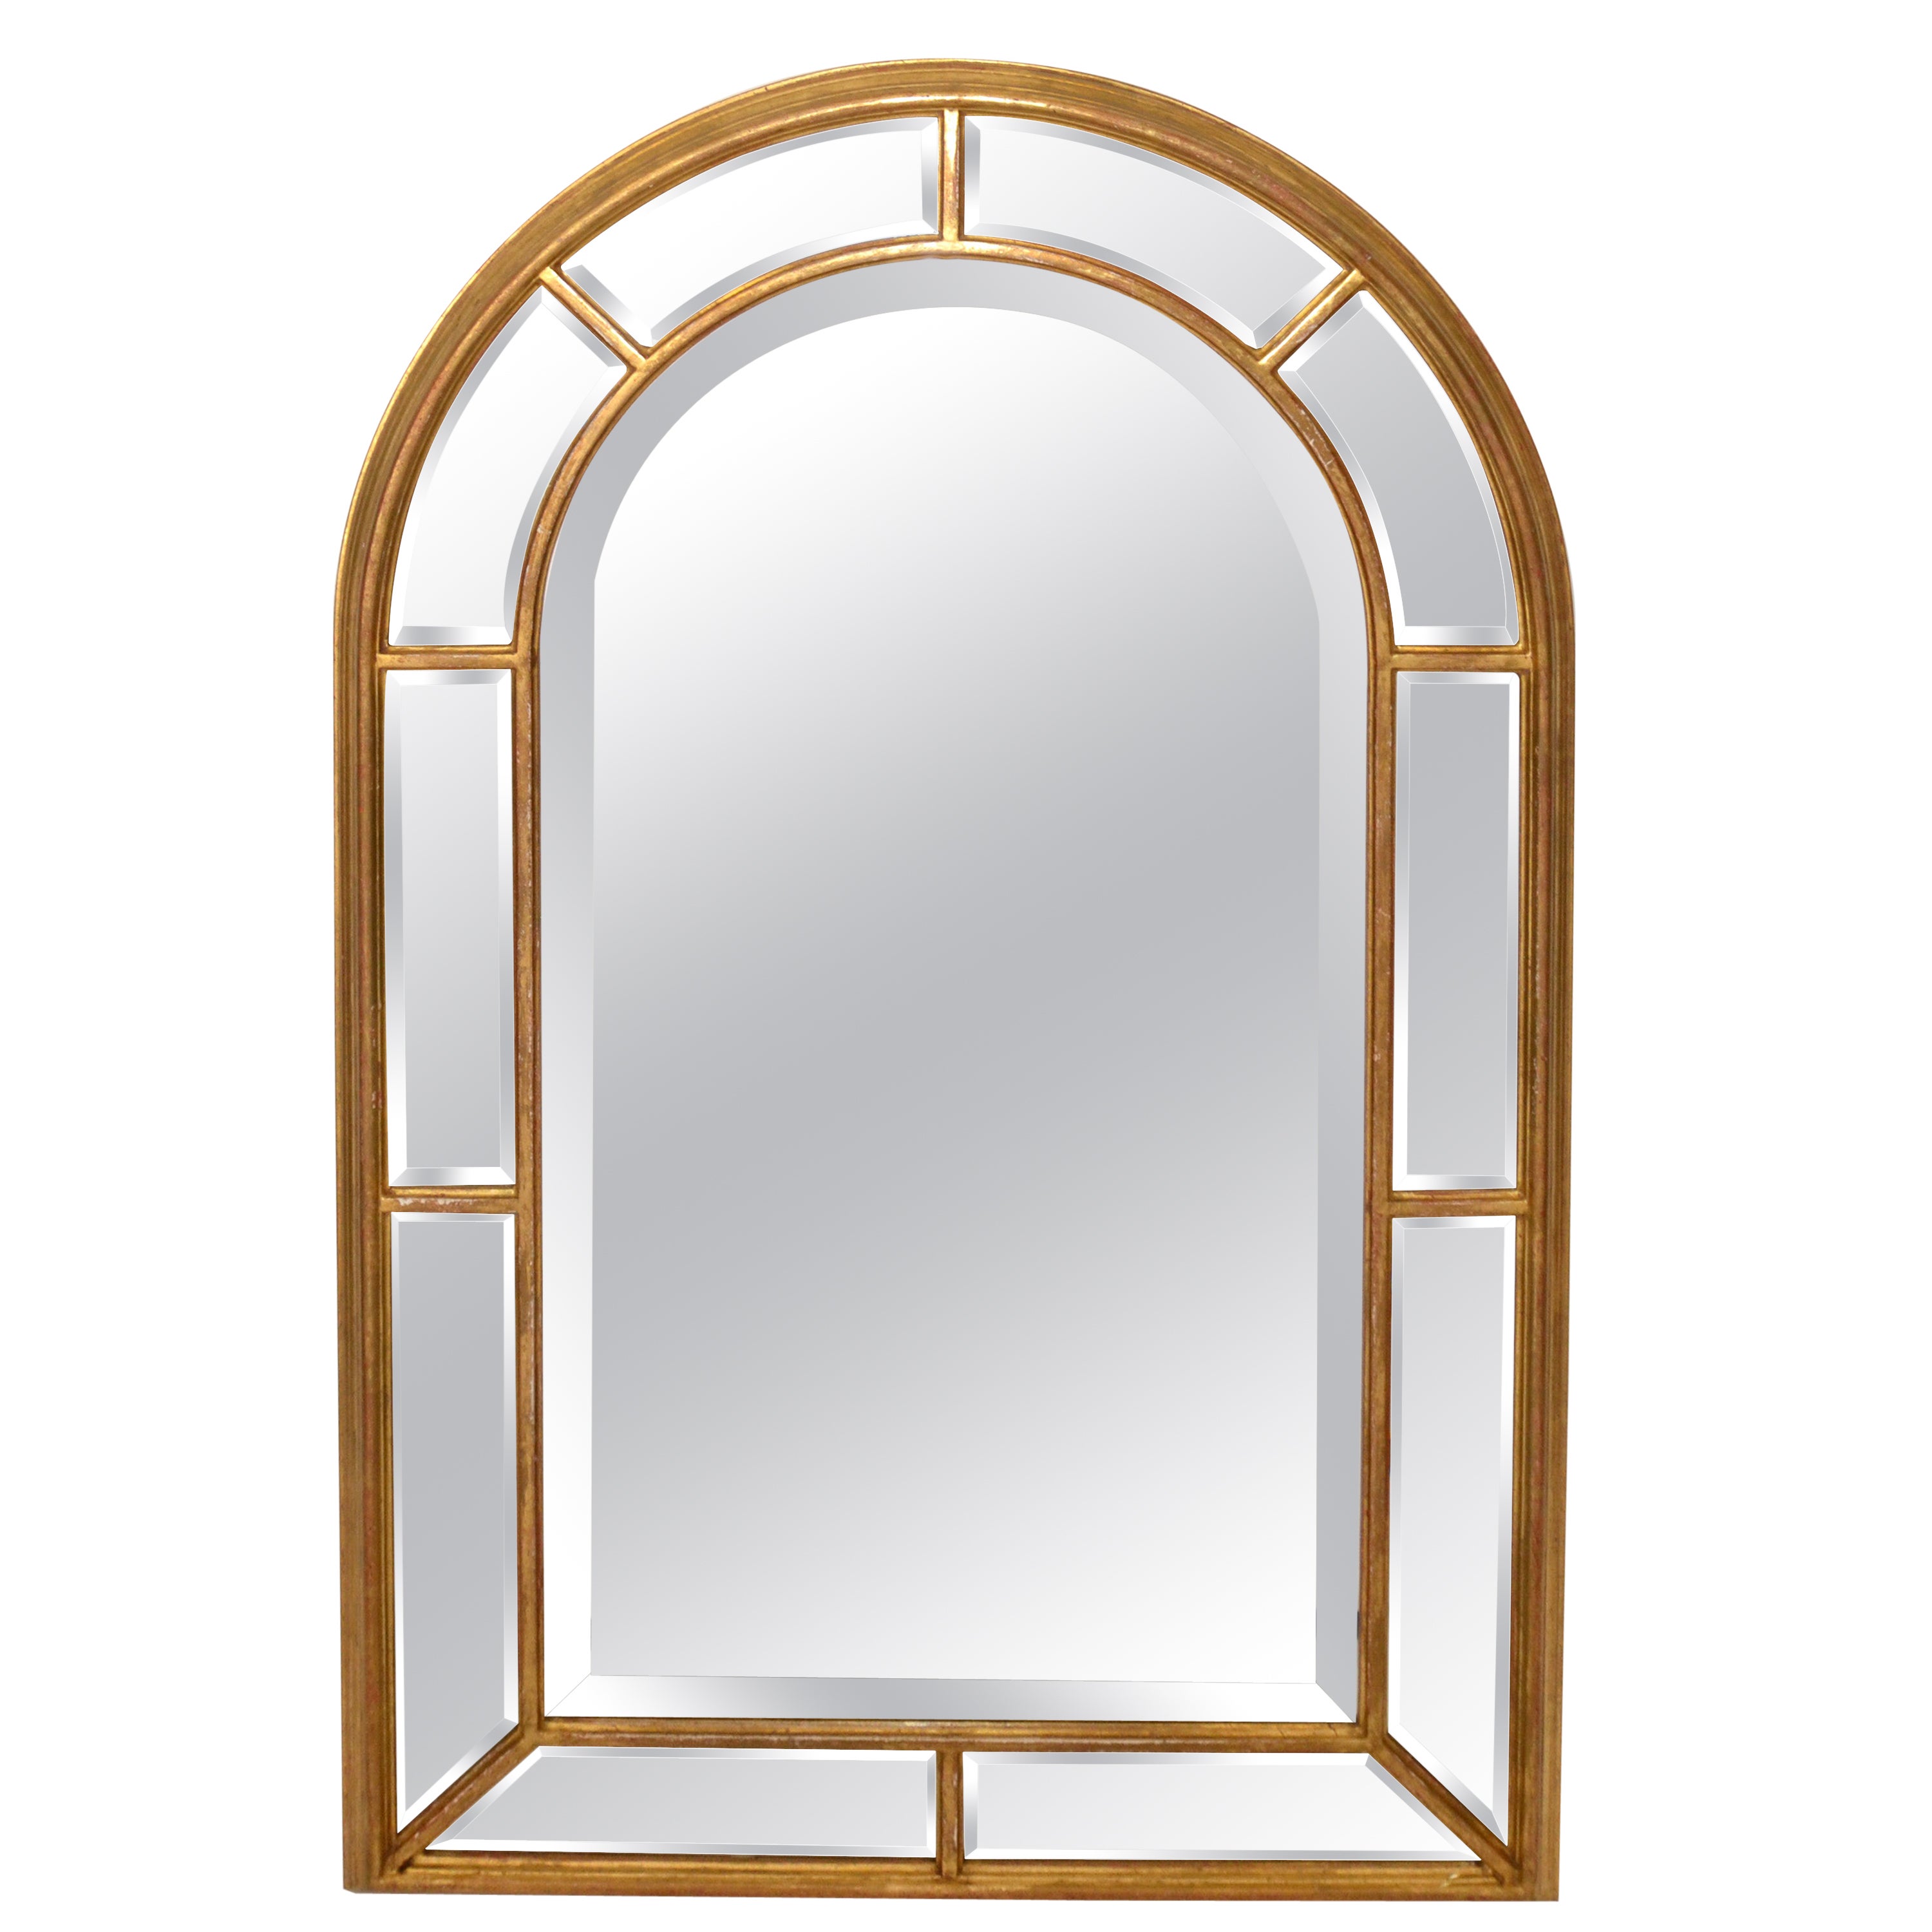 1970s Arch Shaped Italian Firenze Beveled Glass Wall Mirror with Gilt Wood Frame